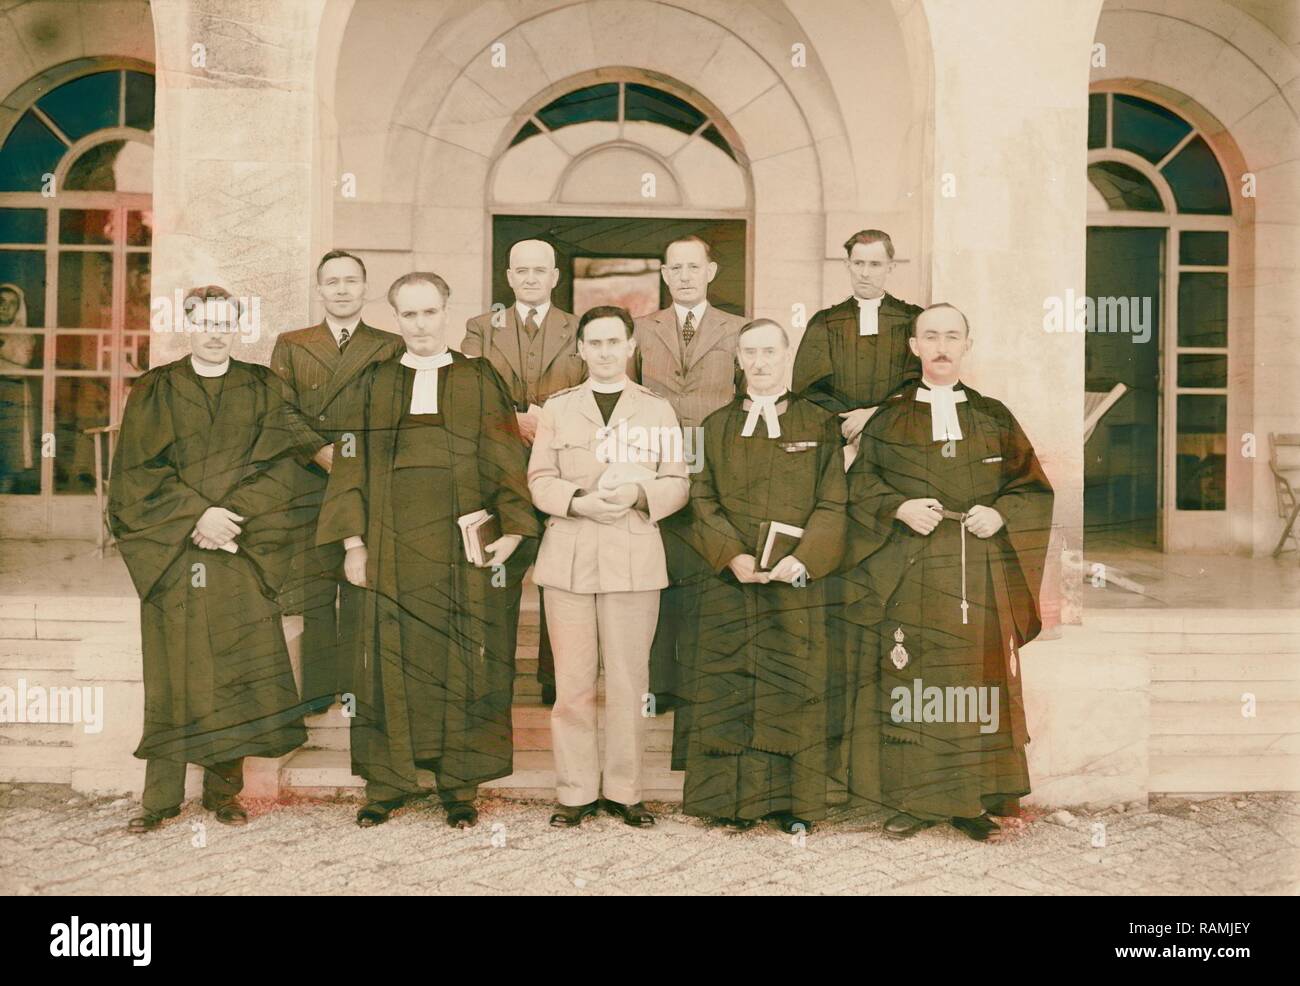 St. Andrew's clergymen, group at Rev. Clark-Kerr's induction on June 5, 1946, Jerusalem, Israel. Reimagined Stock Photo